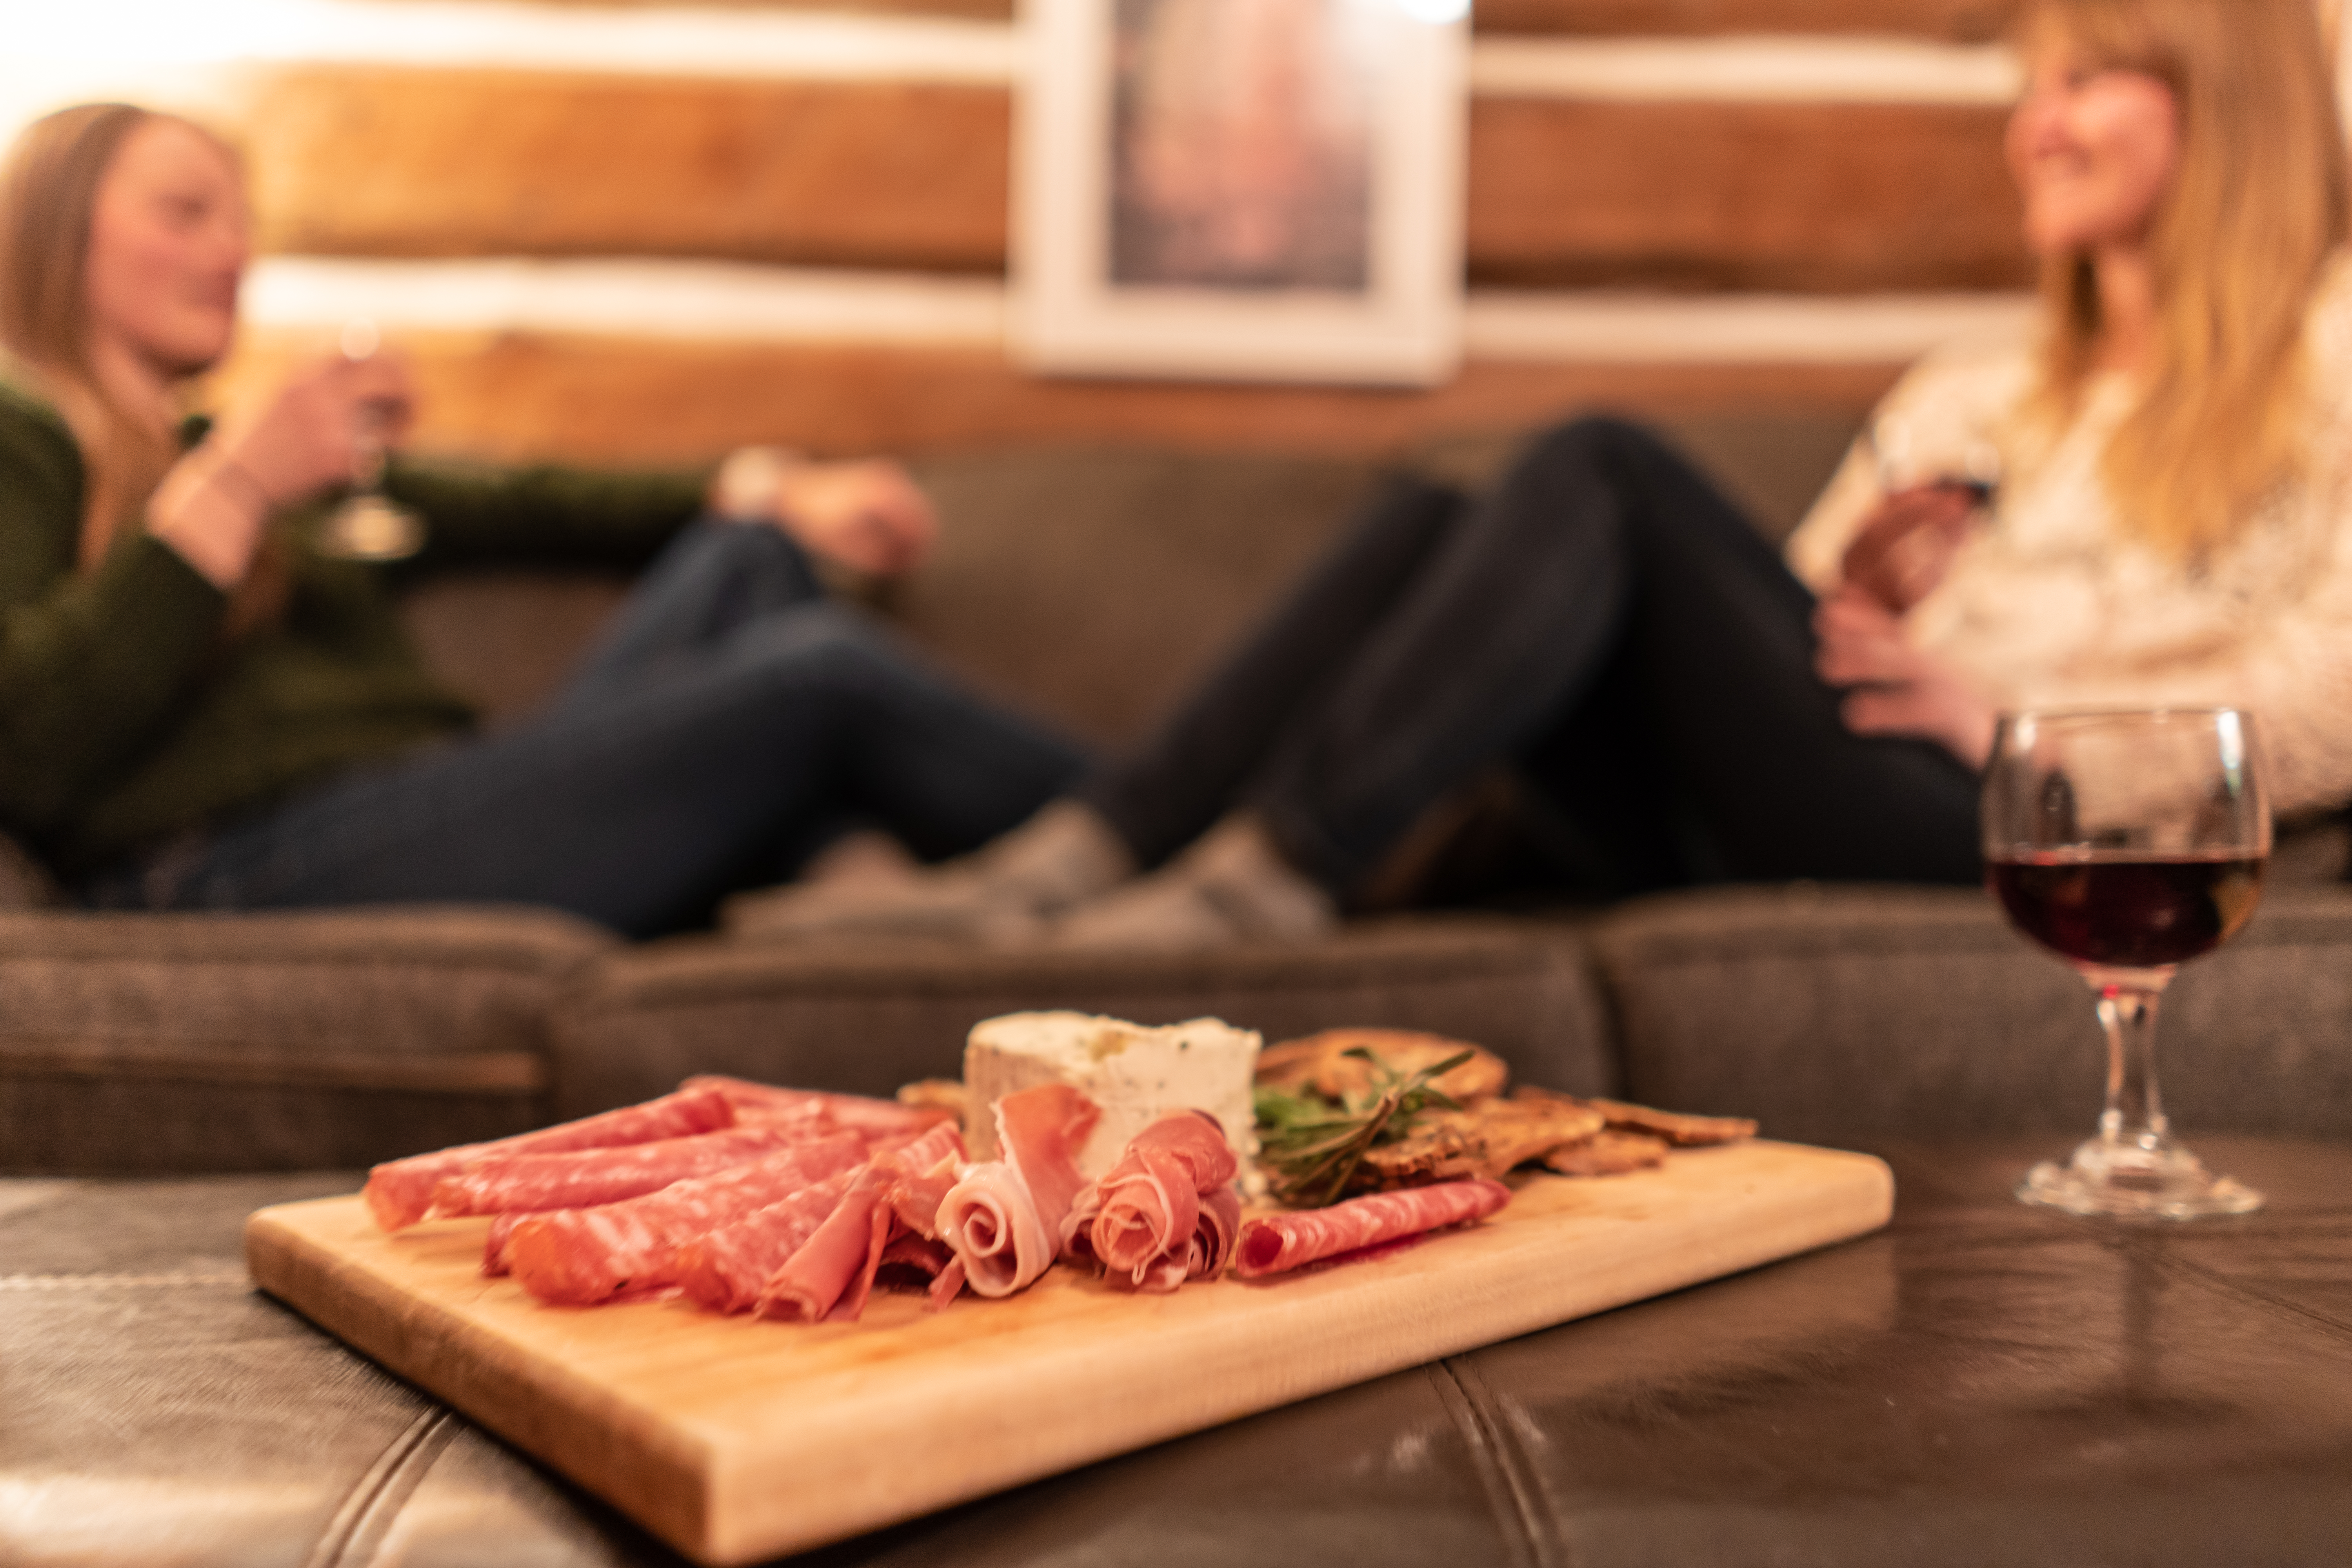 A charcuterie board with meat and cheese is on a table in the foreground, two women sit on a couch in the background.m